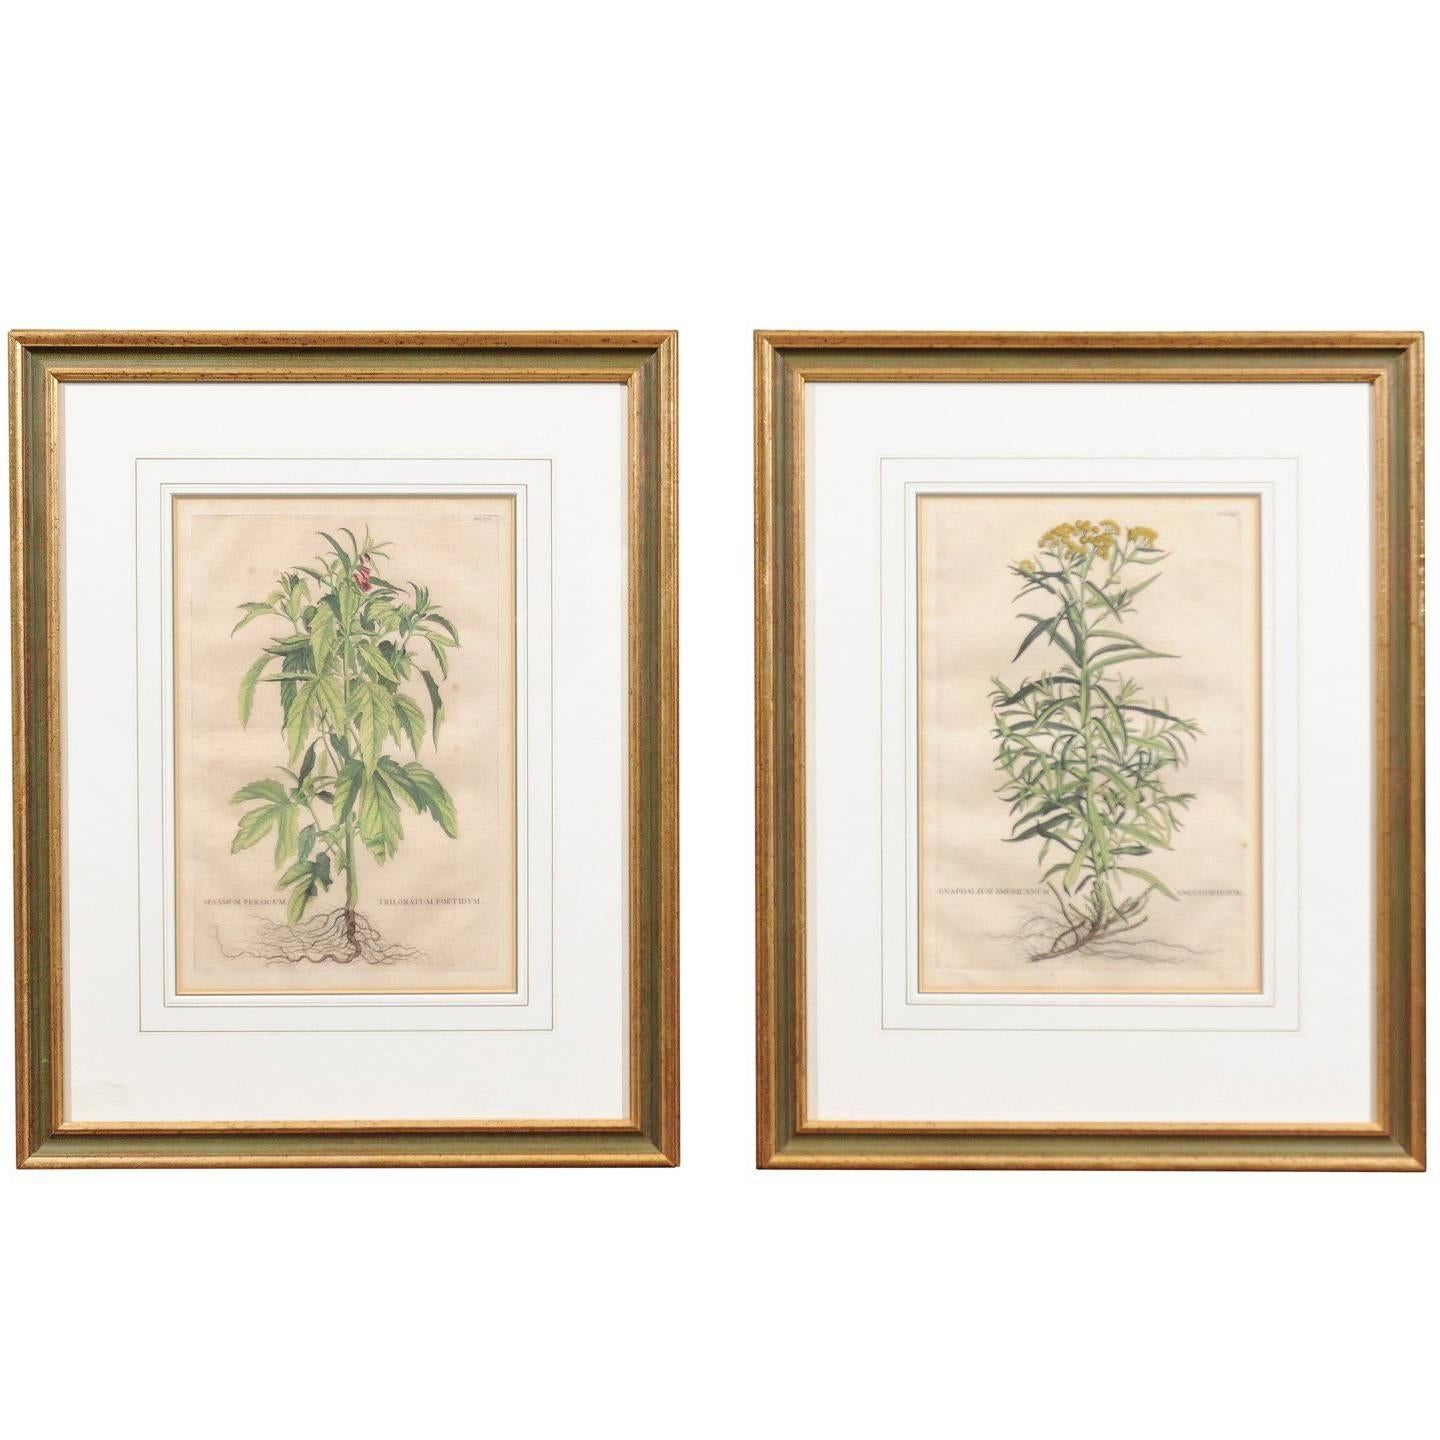 Pair of Gilt Framed Botanical Prints, Dutch, circa 1696 with Later Hand Coloring